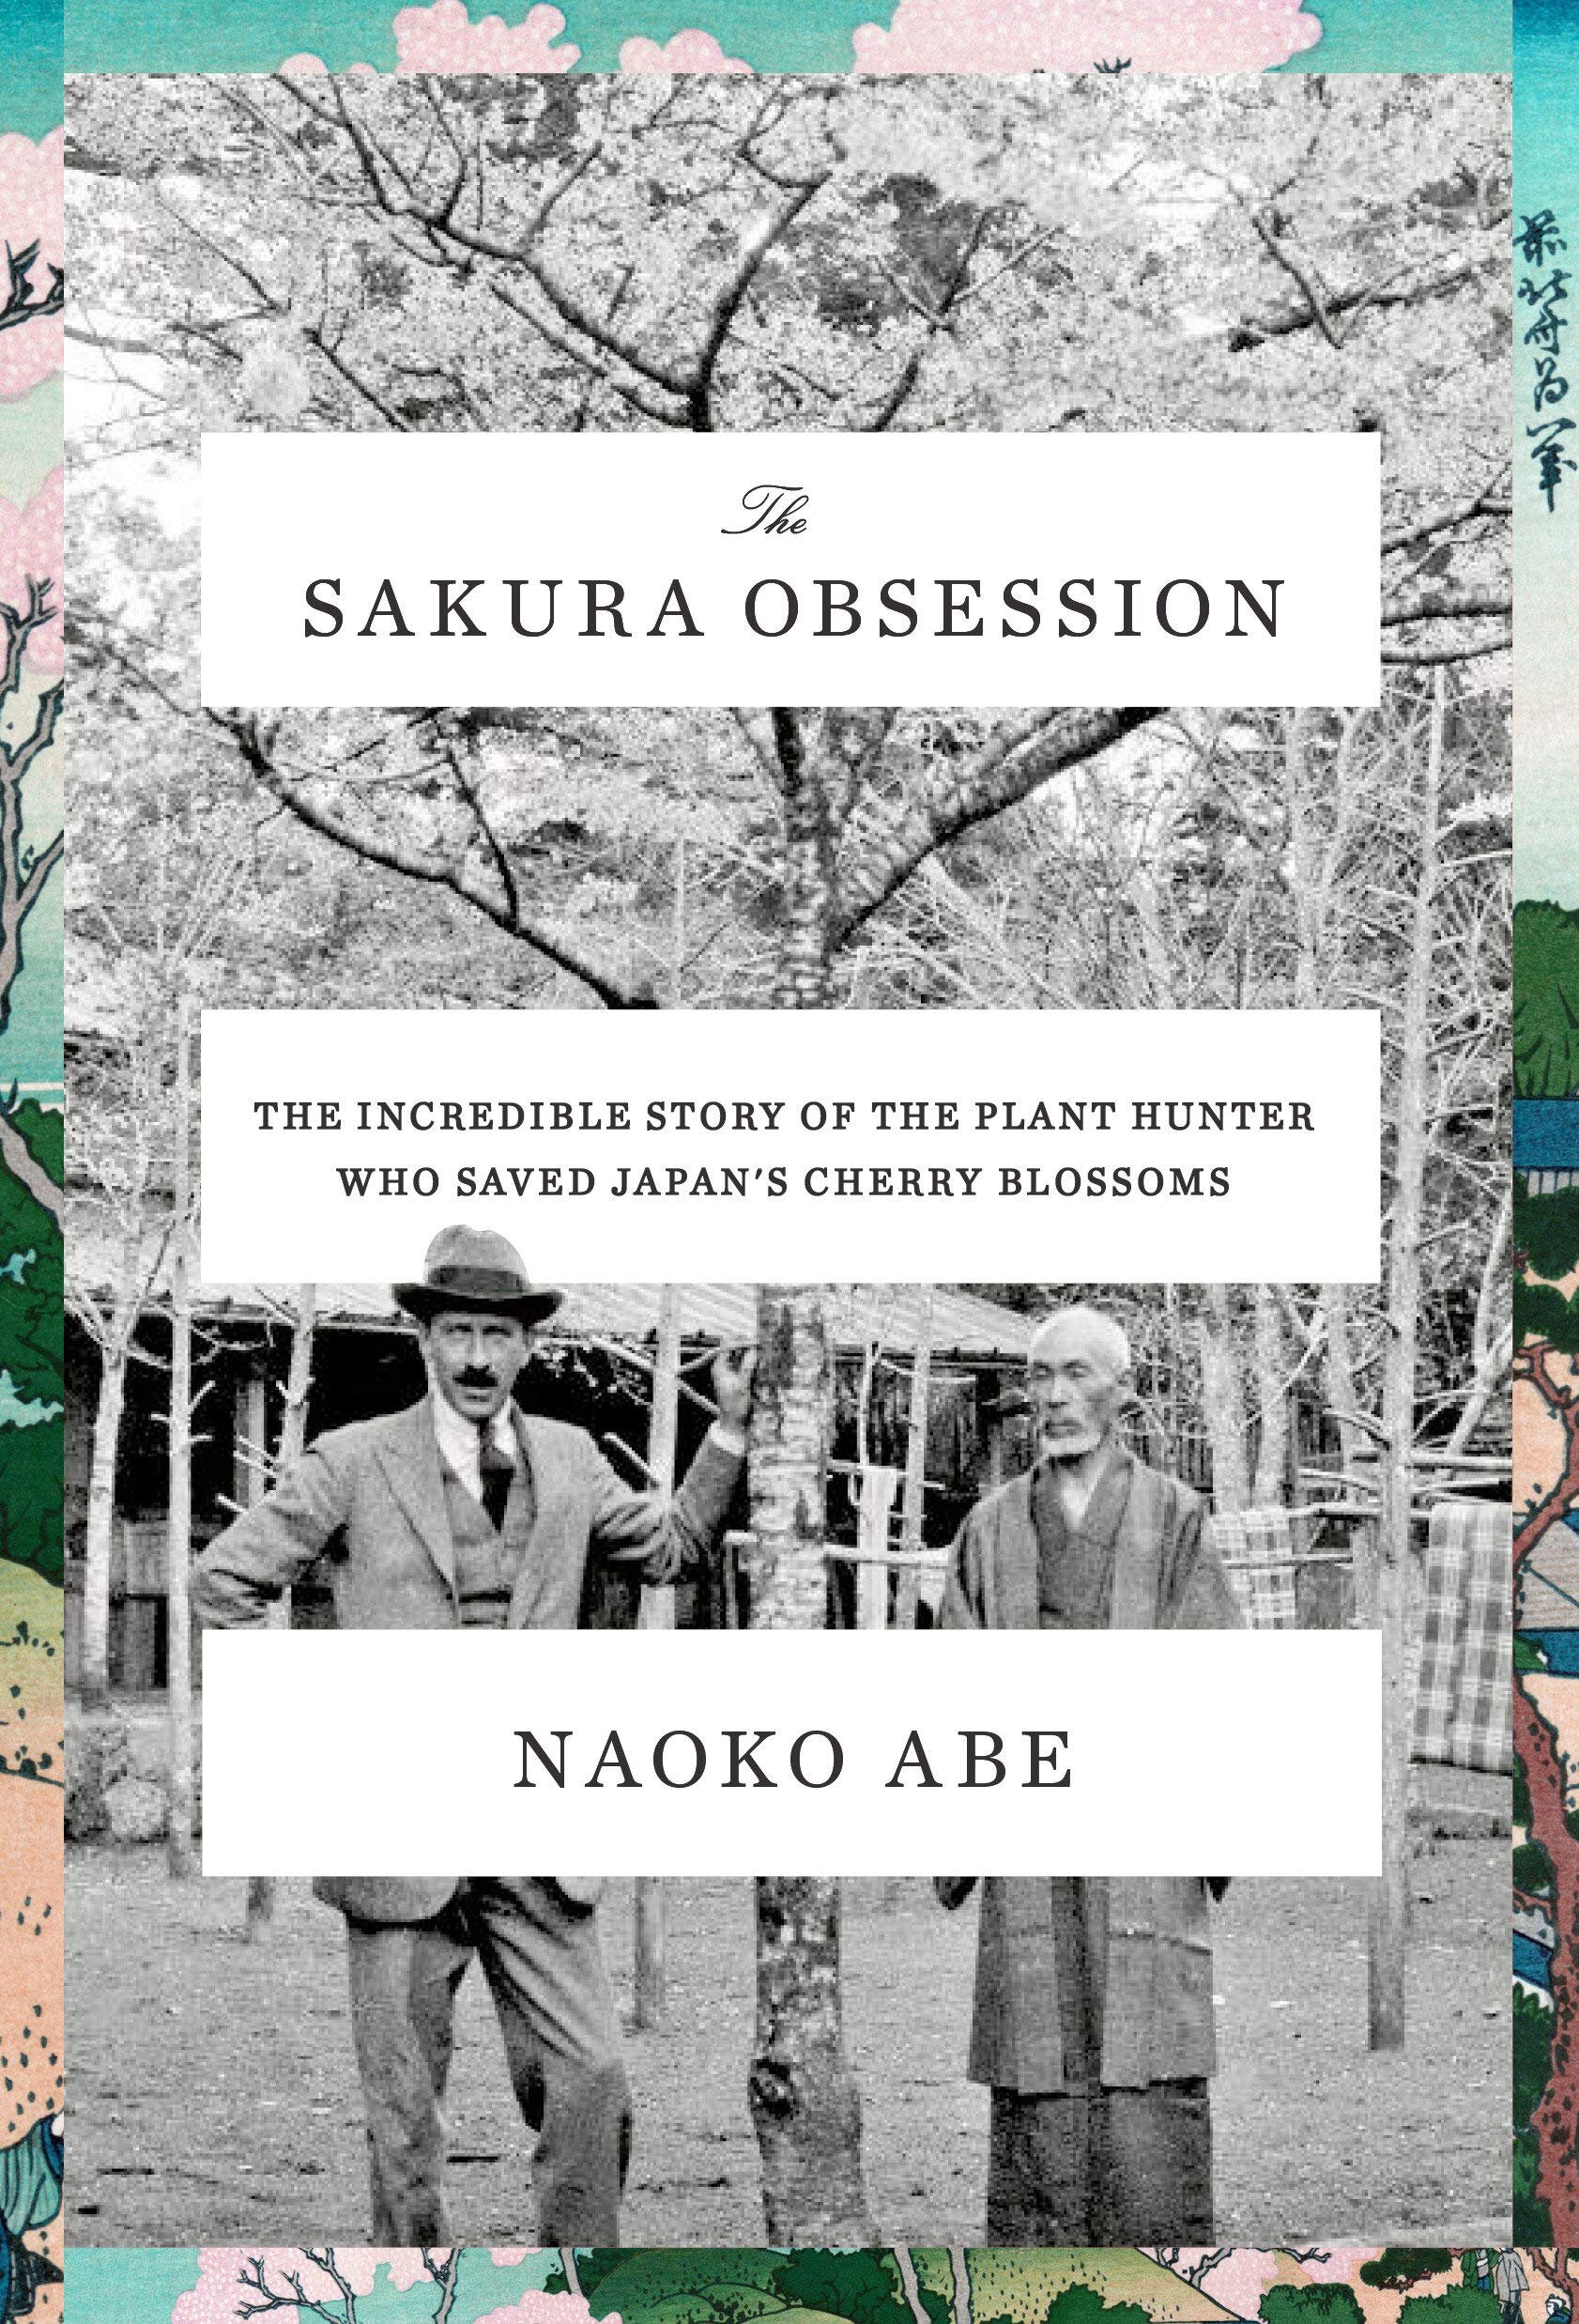 Biography The Sakura Obsession The Incredible Story of the Plant Hunter Who Saved Japan's Cherry Blossoms By Naoko Abe.jpg